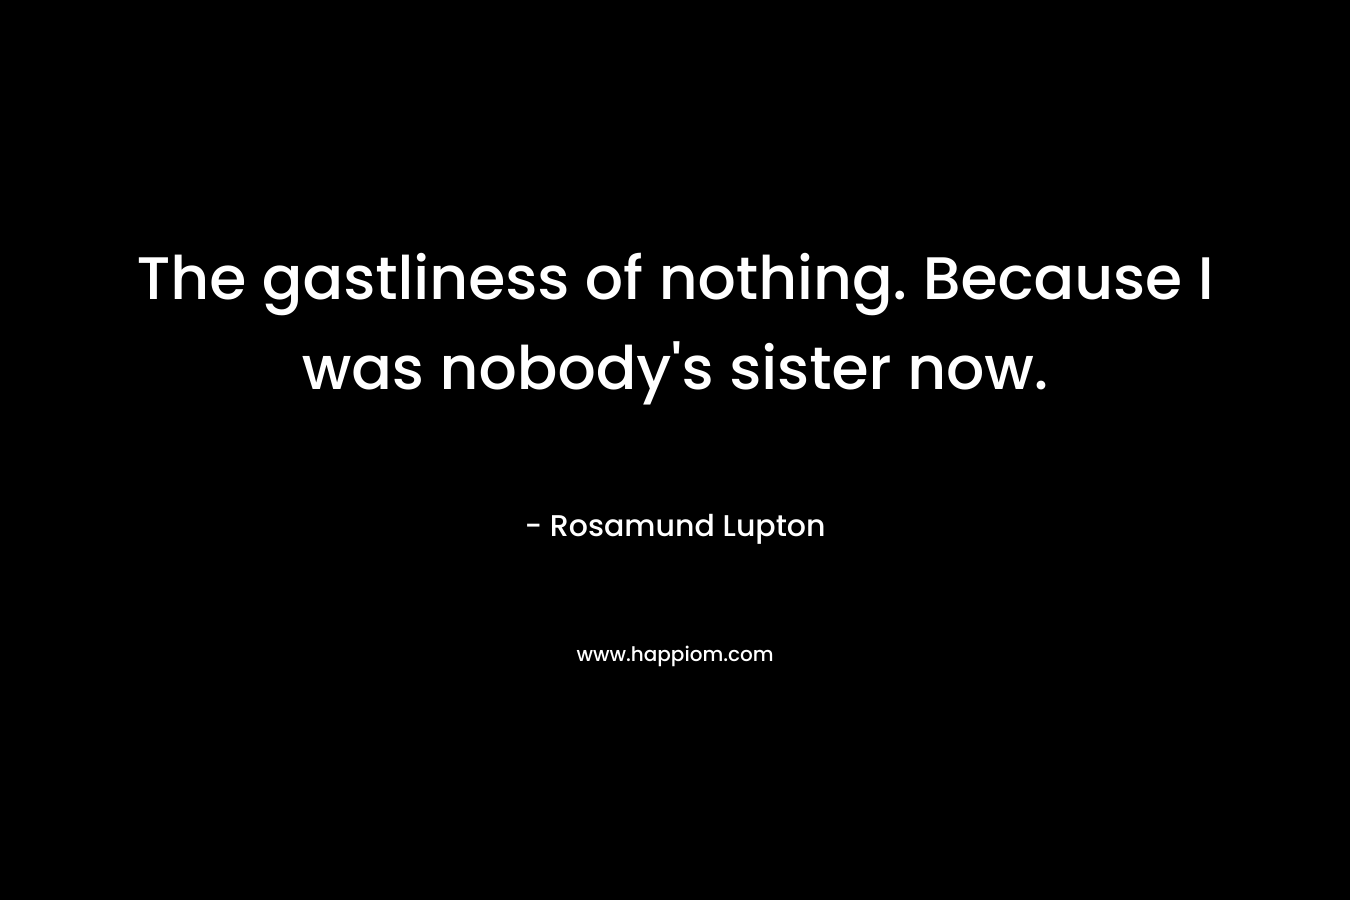 The gastliness of nothing. Because I was nobody’s sister now. – Rosamund Lupton